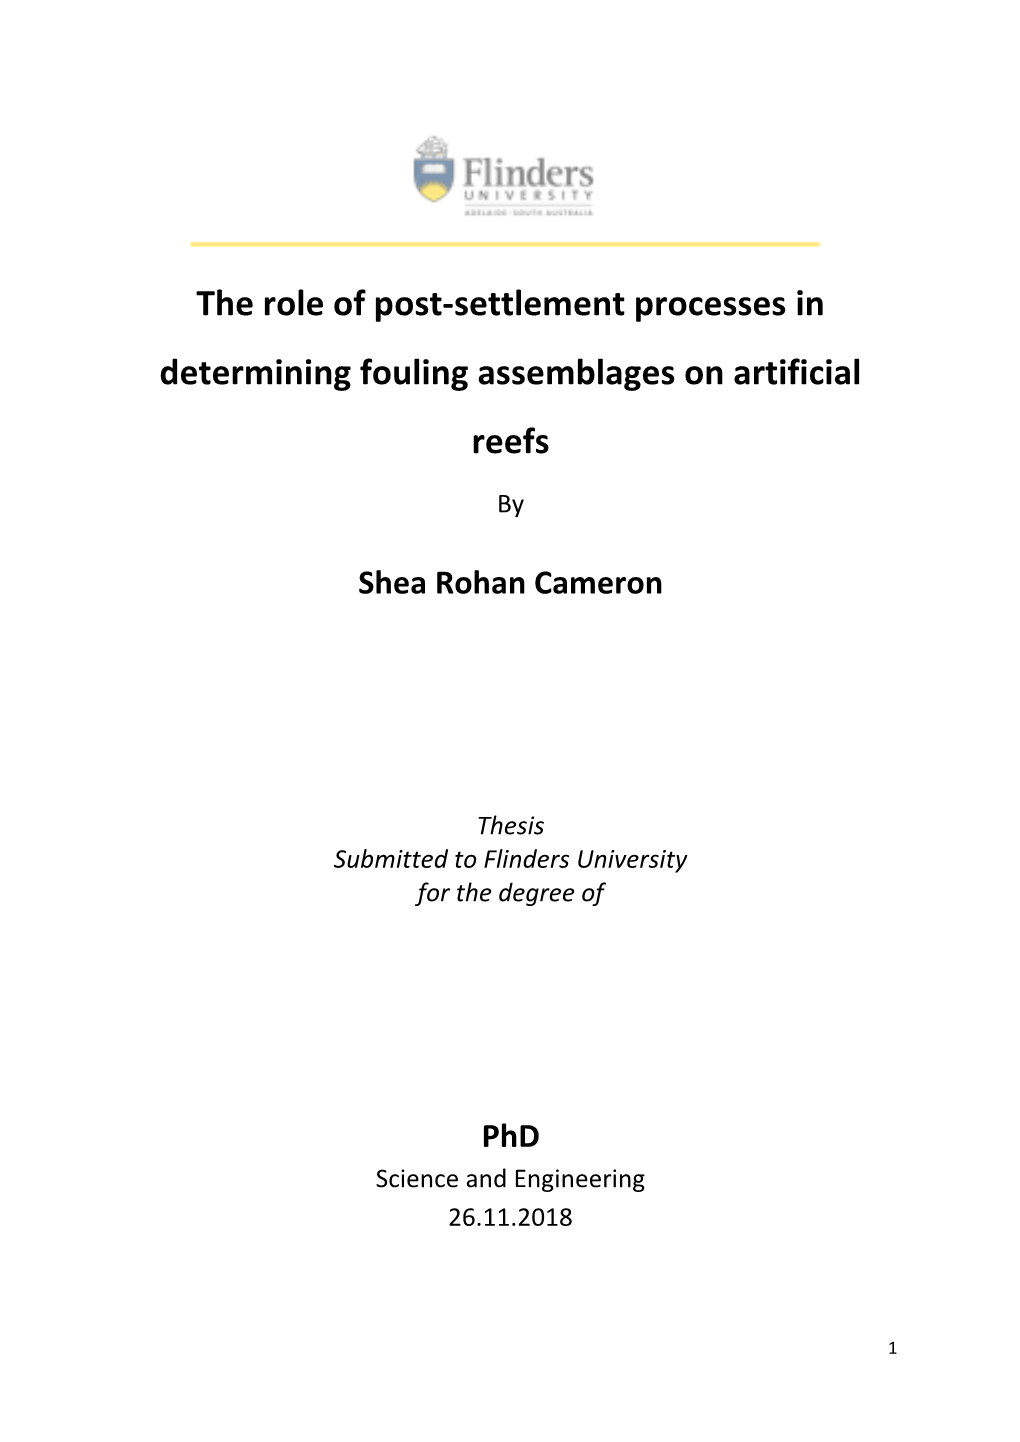 The Role of Post-Settlement Processes in Determining Fouling Assemblages on Artificial Reefs